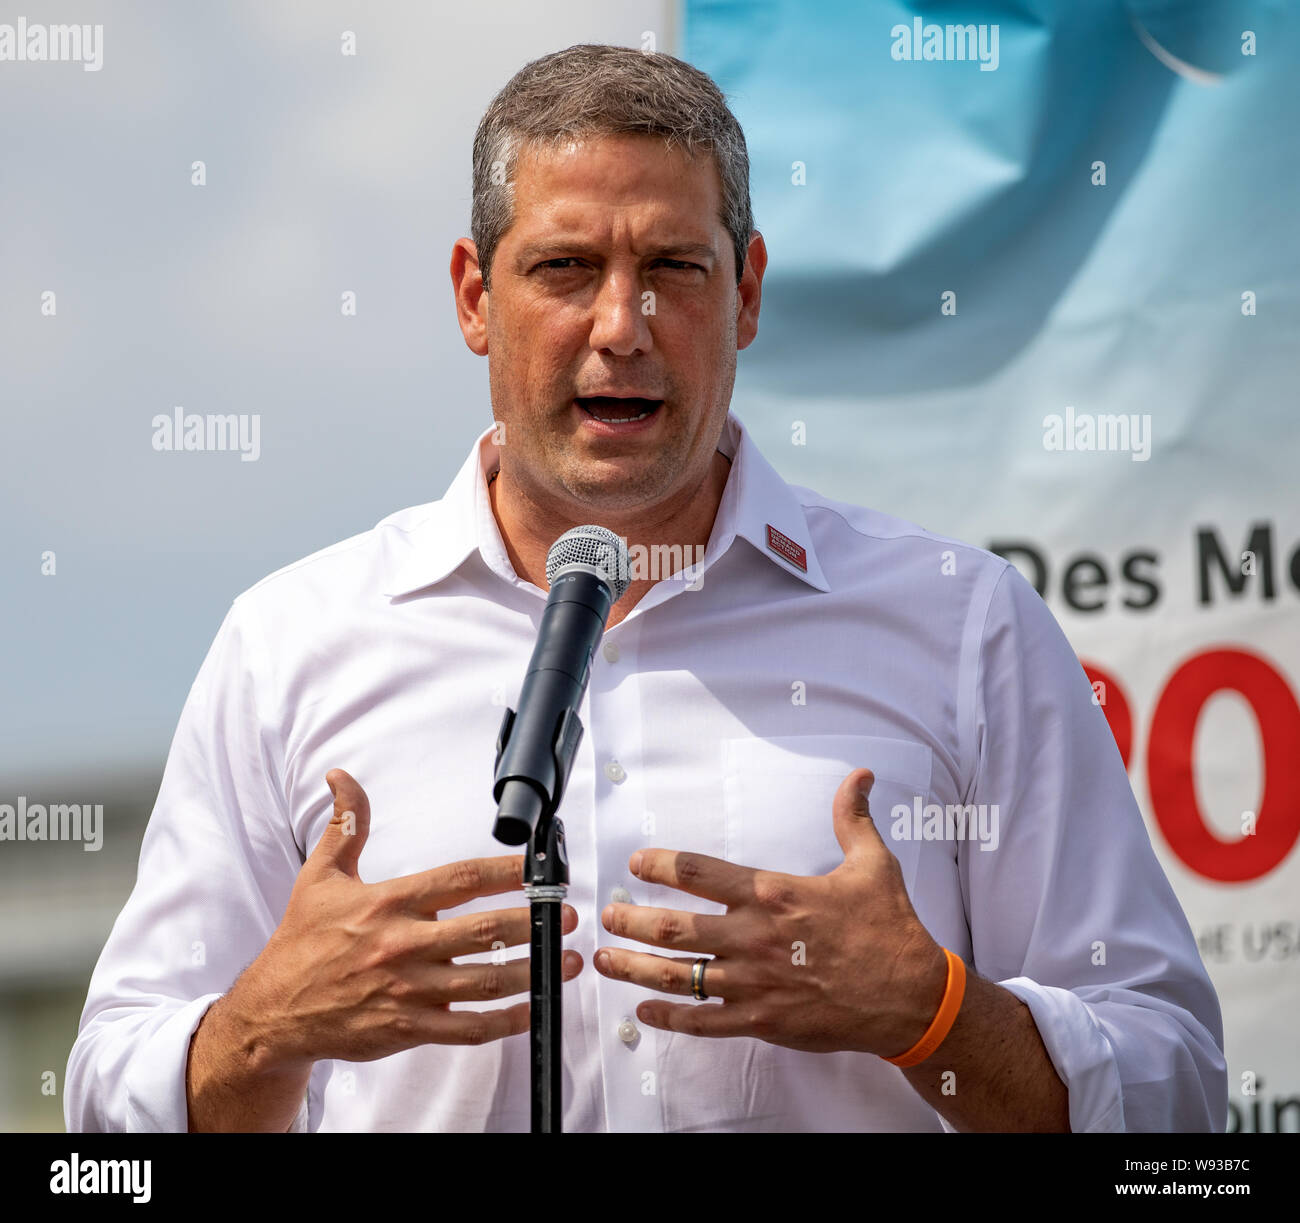 Des Moines, Iowa / USA - August 10, 2019: United States Congressman and Democratic presidential candidate Tim Ryan greets supporters at the Iowa State Stock Photo